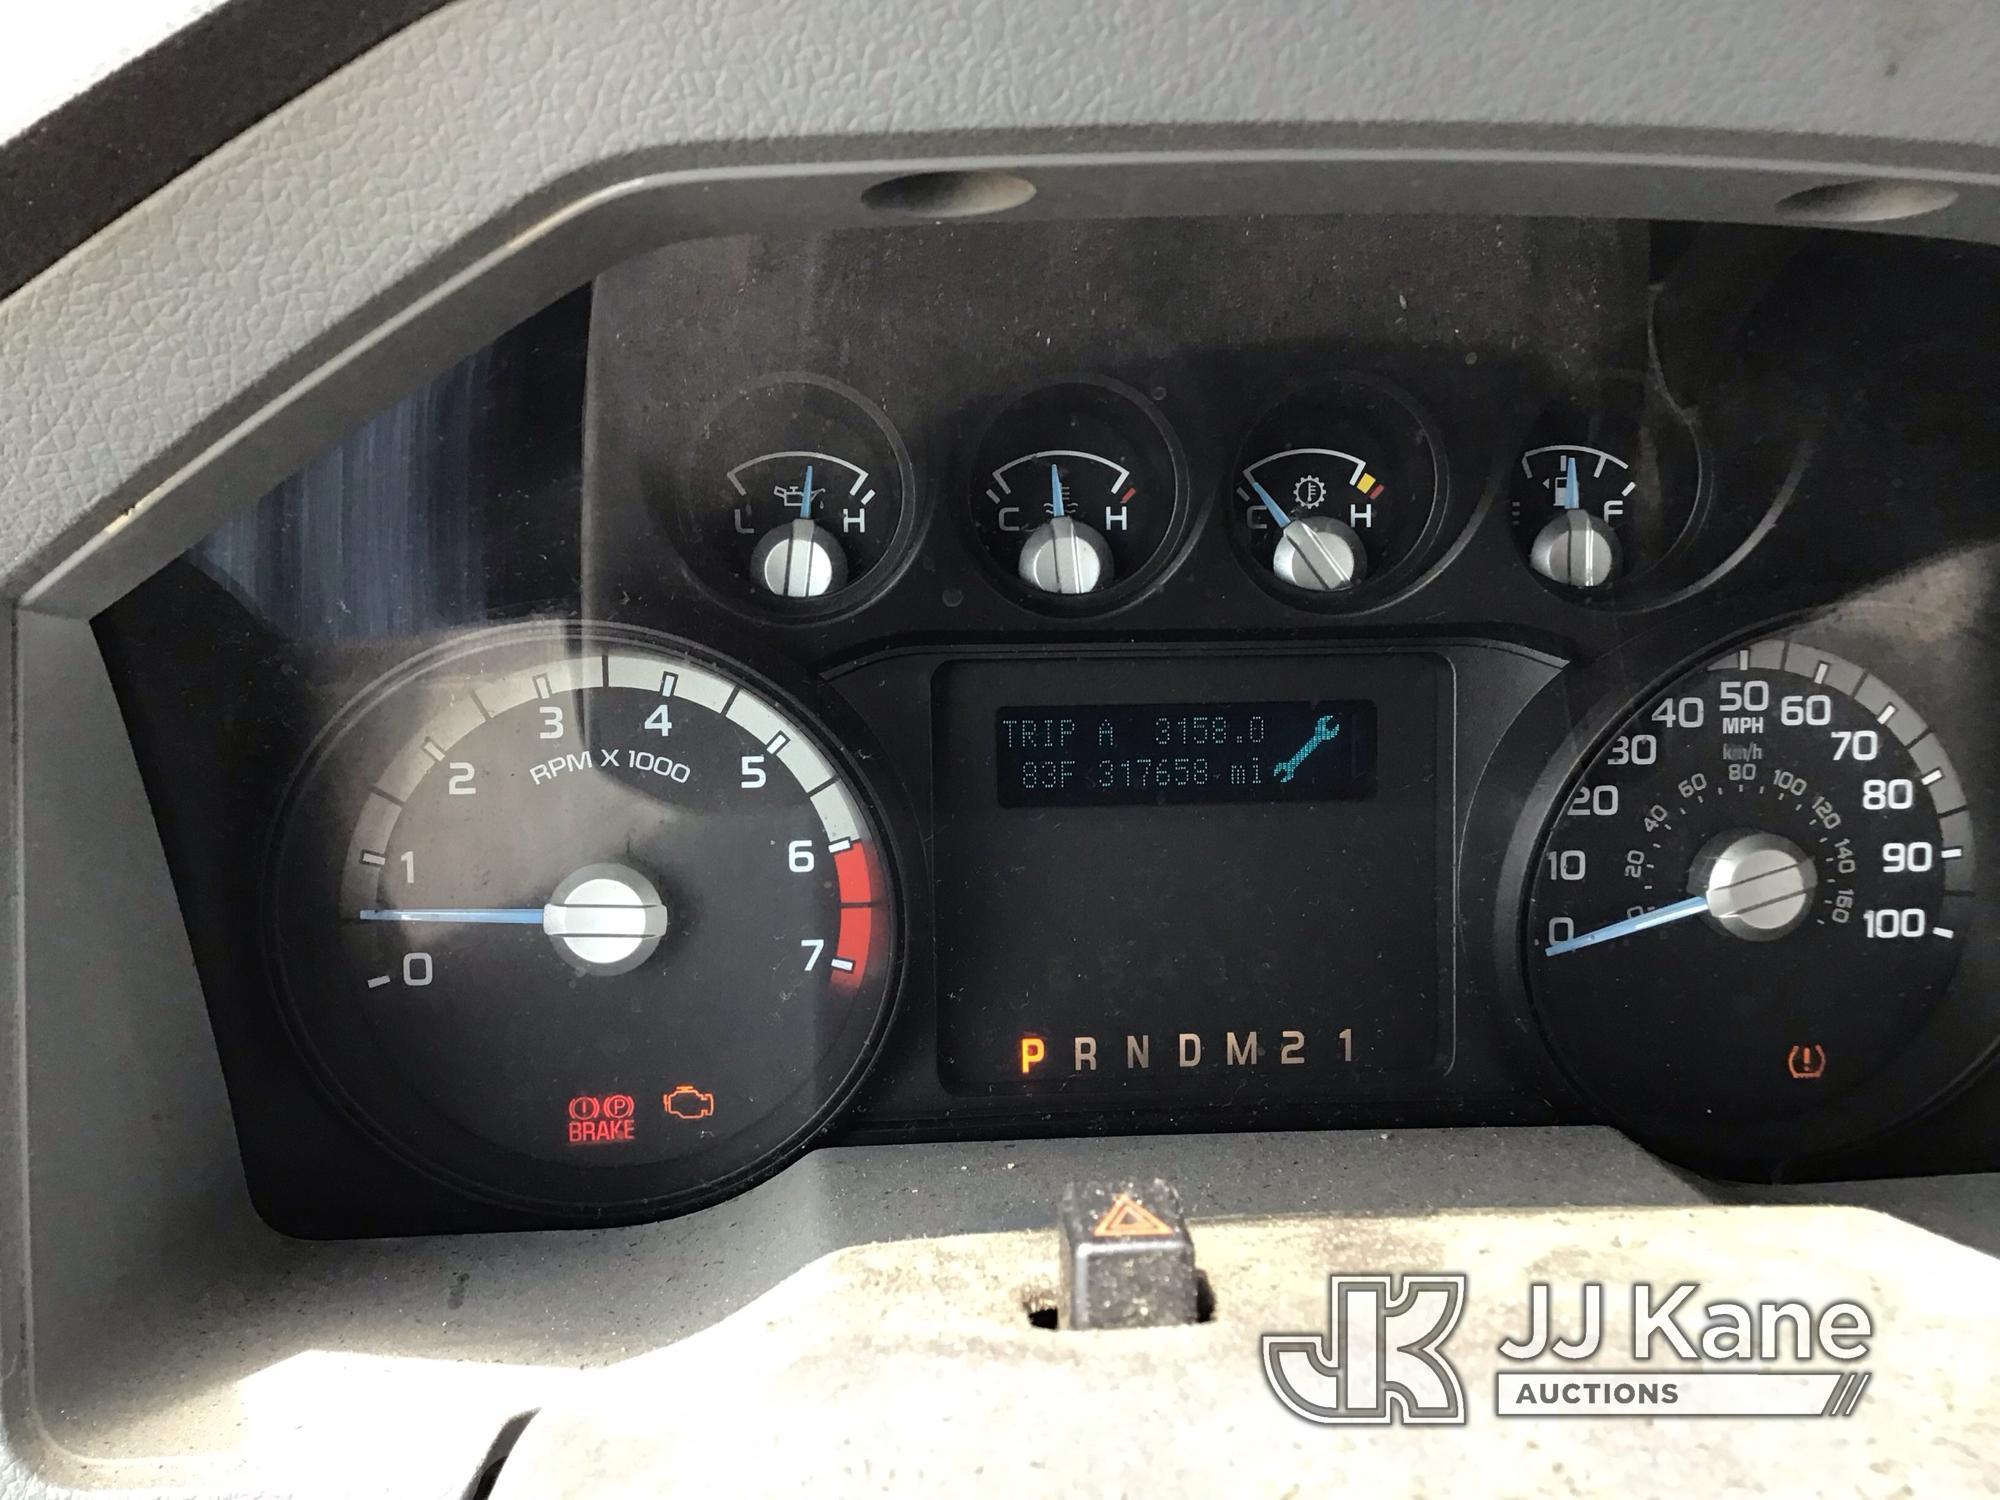 (Byram, MS) 2012 Ford F350 4x4 Crew-Cab Pickup Truck Runs & Moves) (As Per Seller: Needs Some Repair